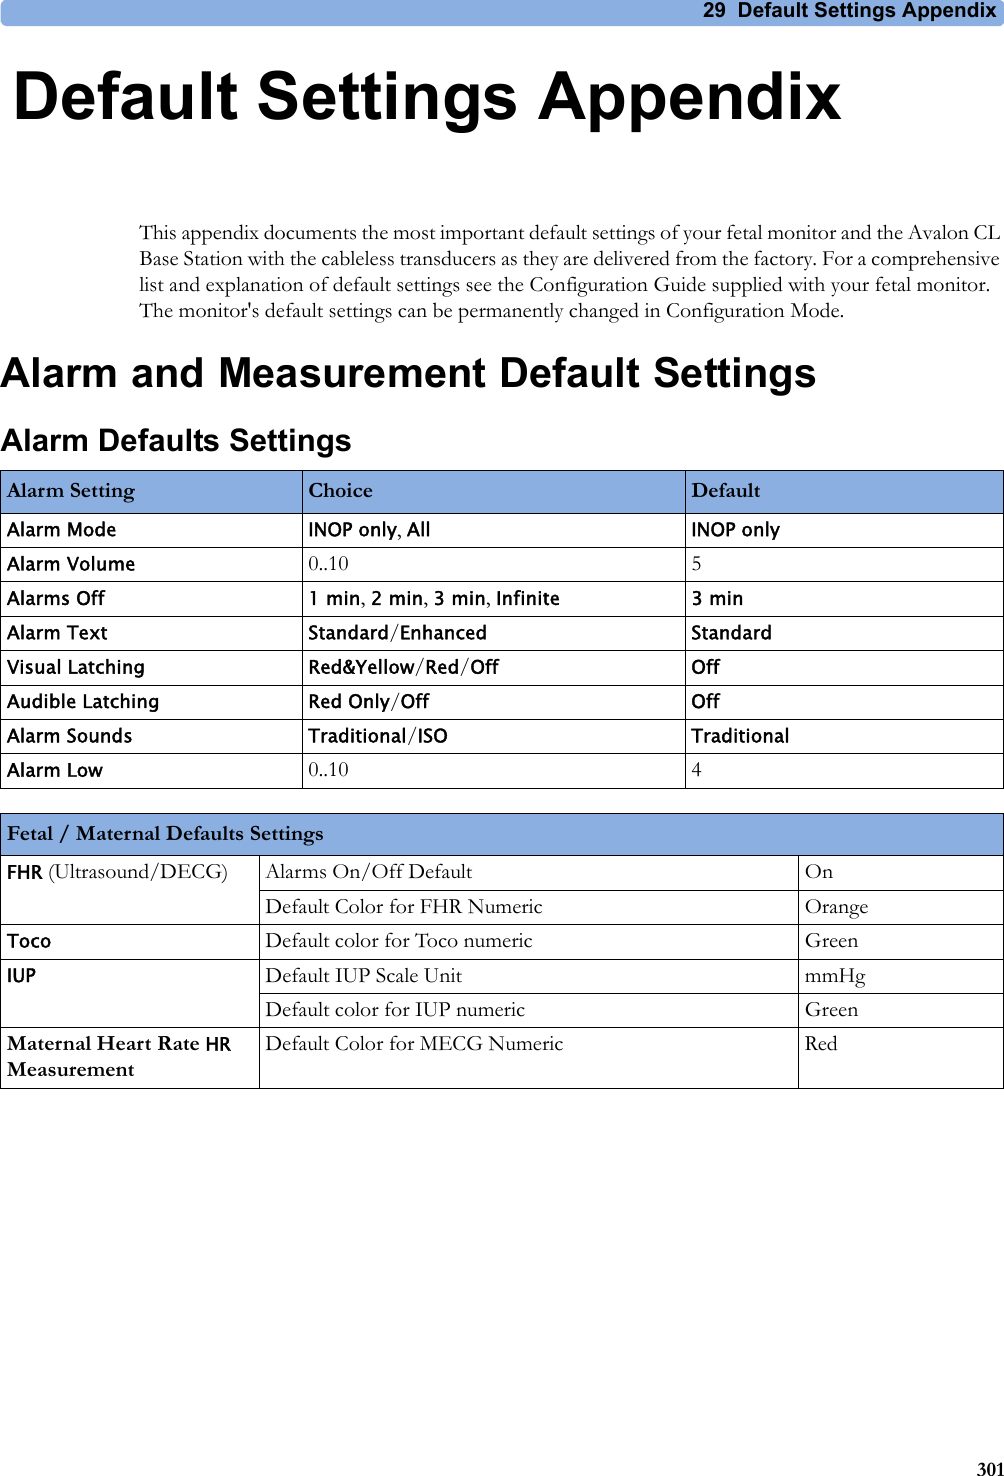 29 Default Settings Appendix30129Default Settings AppendixThis appendix documents the most important default settings of your fetal monitor and the Avalon CL Base Station with the cableless transducers as they are delivered from the factory. For a comprehensive list and explanation of default settings see the Configuration Guide supplied with your fetal monitor. The monitor&apos;s default settings can be permanently changed in Configuration Mode.Alarm and Measurement Default SettingsAlarm Defaults SettingsAlarm Setting Choice DefaultAlarm Mode INOP only, All INOP onlyAlarm Volume 0..10 5Alarms Off 1 min, 2 min, 3 min, Infinite 3 minAlarm Text Standard/Enhanced StandardVisual Latching Red&amp;Yellow/Red/Off OffAudible Latching Red Only/Off OffAlarm Sounds Traditional/ISO TraditionalAlarm Low 0..10 4Fetal / Maternal Defaults SettingsFHR (Ultrasound/DECG) Alarms On/Off Default OnDefault Color for FHR Numeric OrangeToco Default color for Toco numeric GreenIUP Default IUP Scale Unit mmHgDefault color for IUP numeric GreenMaternal Heart Rate HR MeasurementDefault Color for MECG Numeric Red